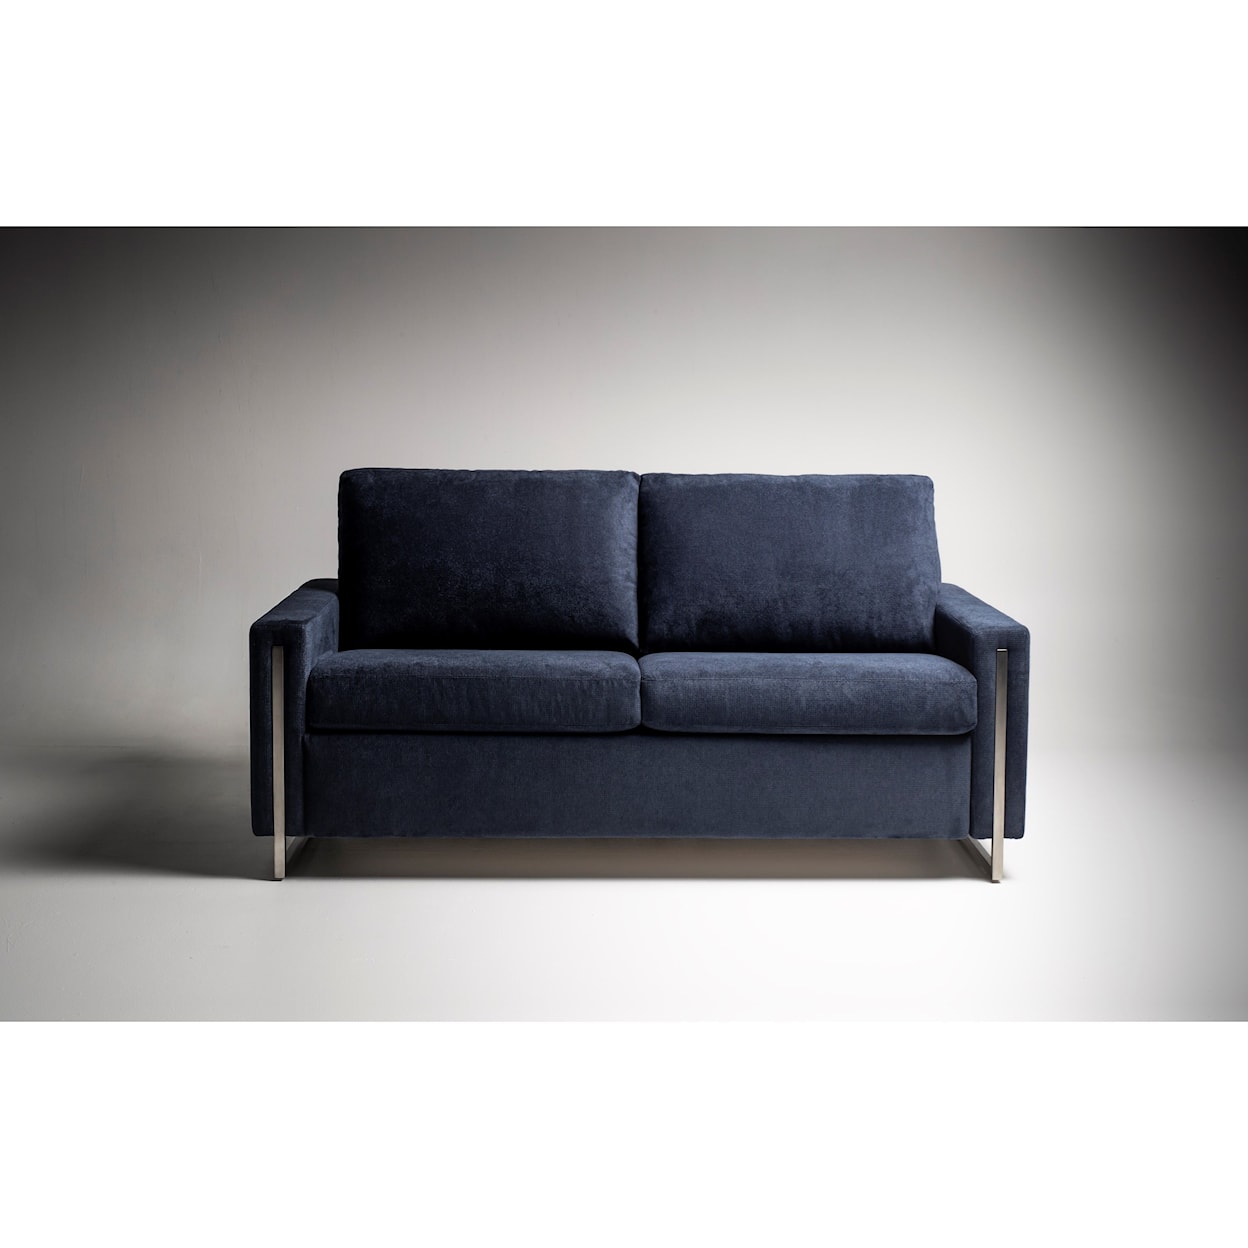 American Leather Sulley Queen Sofa Sleeper